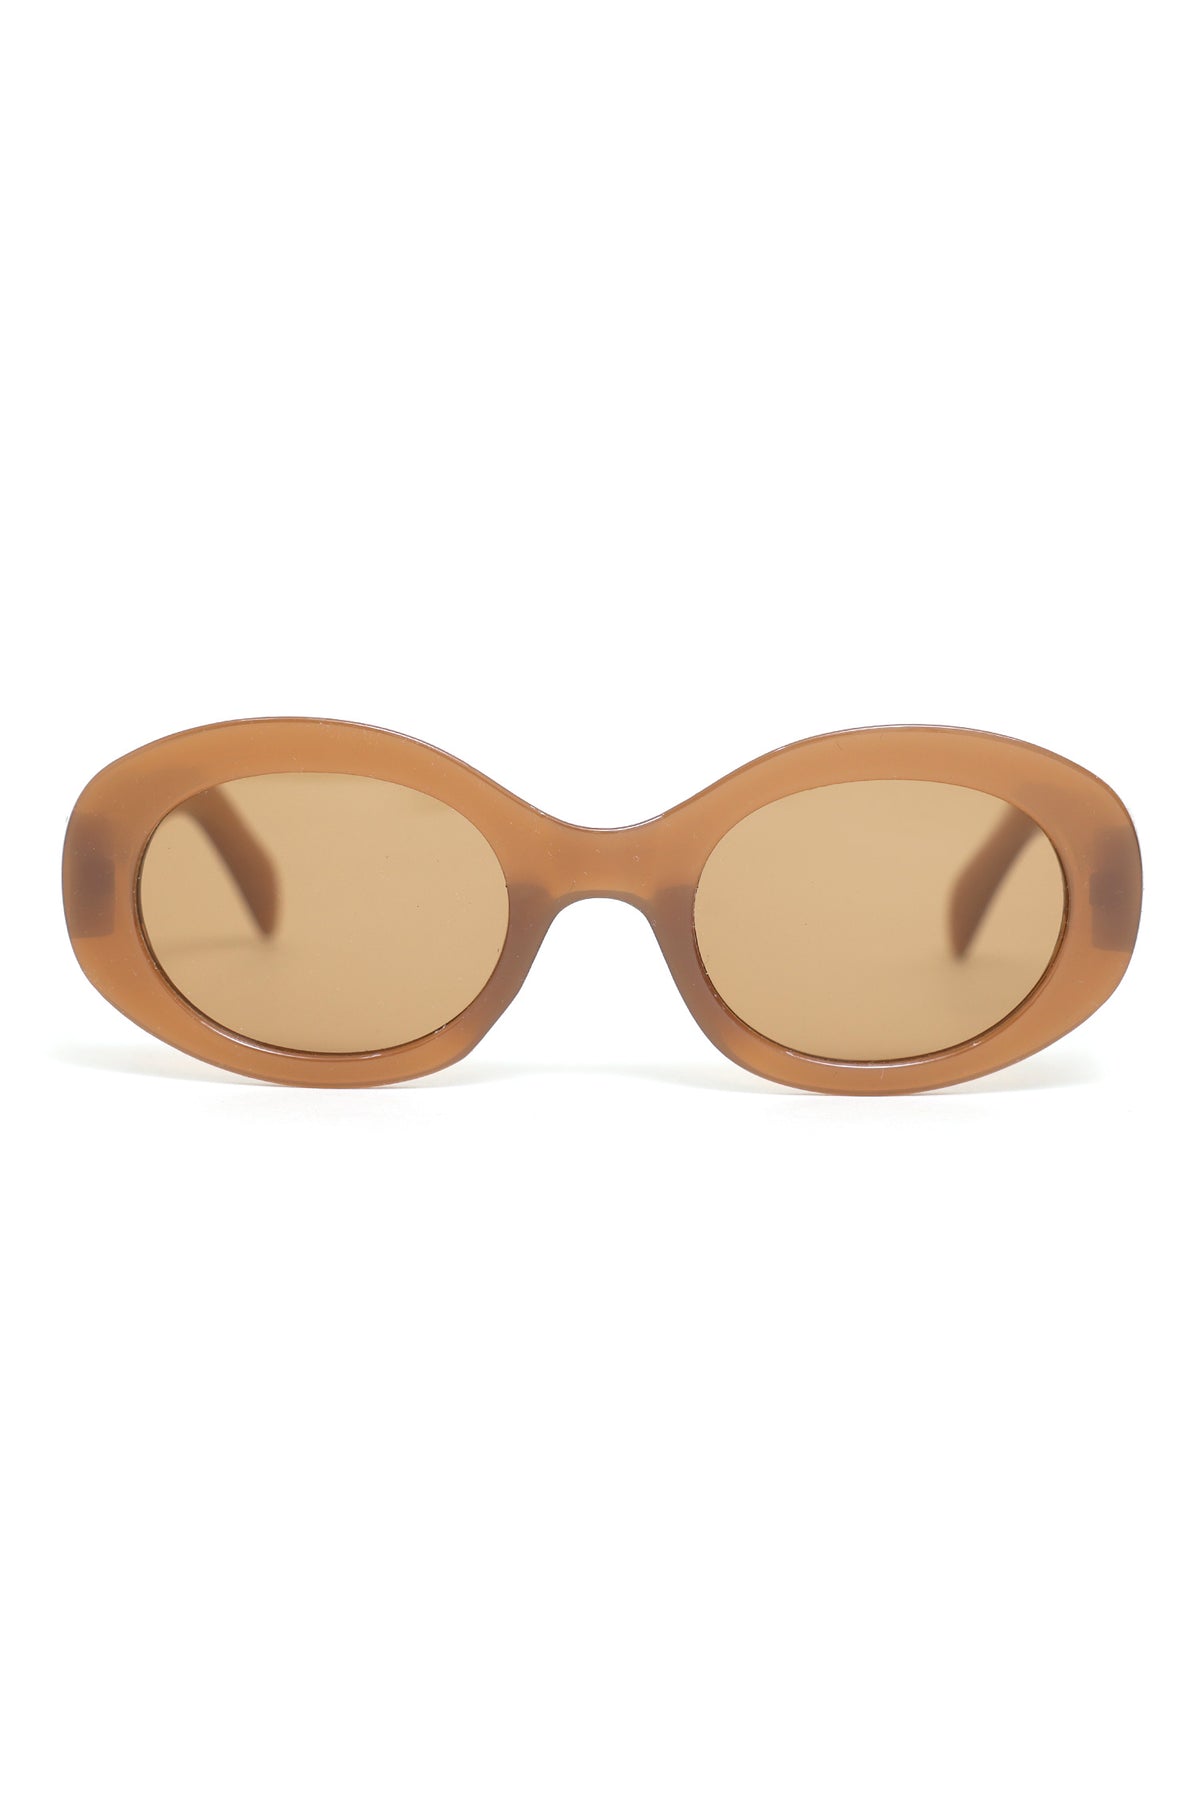 CLASSIC OVAL SUNGLASSES-BROWN